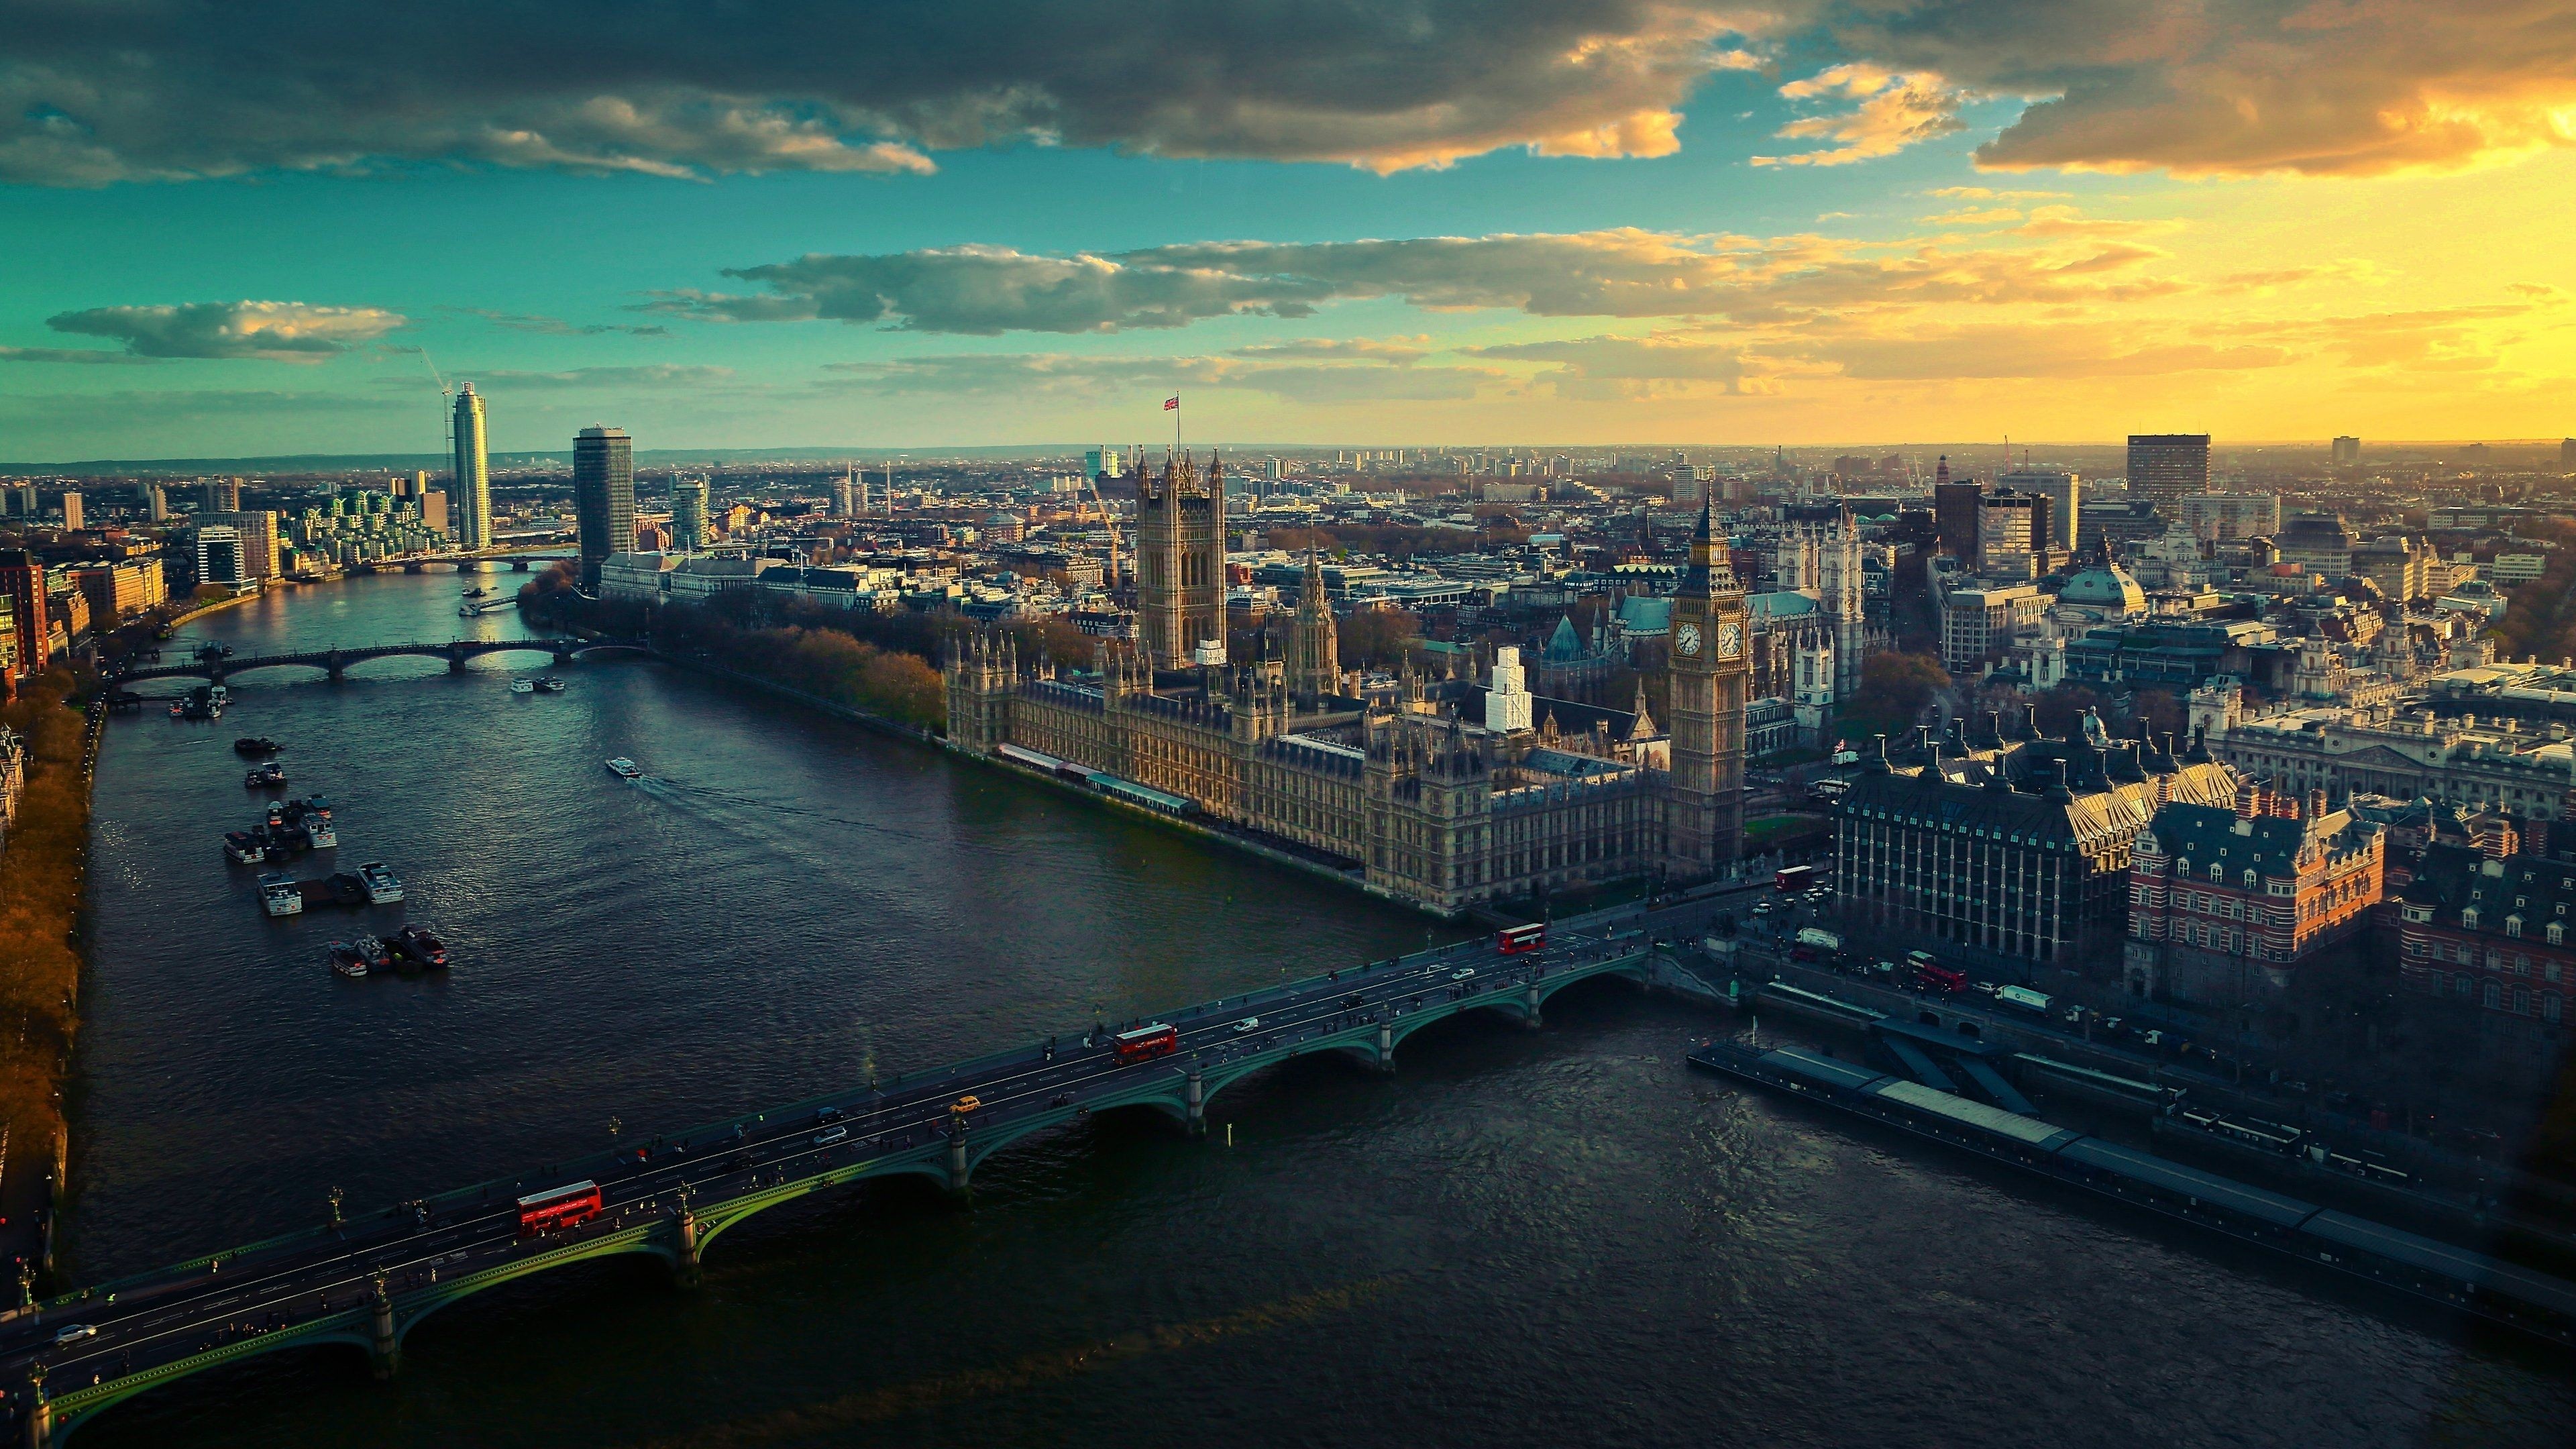 3840x2160 4k triple monitor wallpaper hdr - Urban view from London ultra hd wallpapers  Ultra High Definition